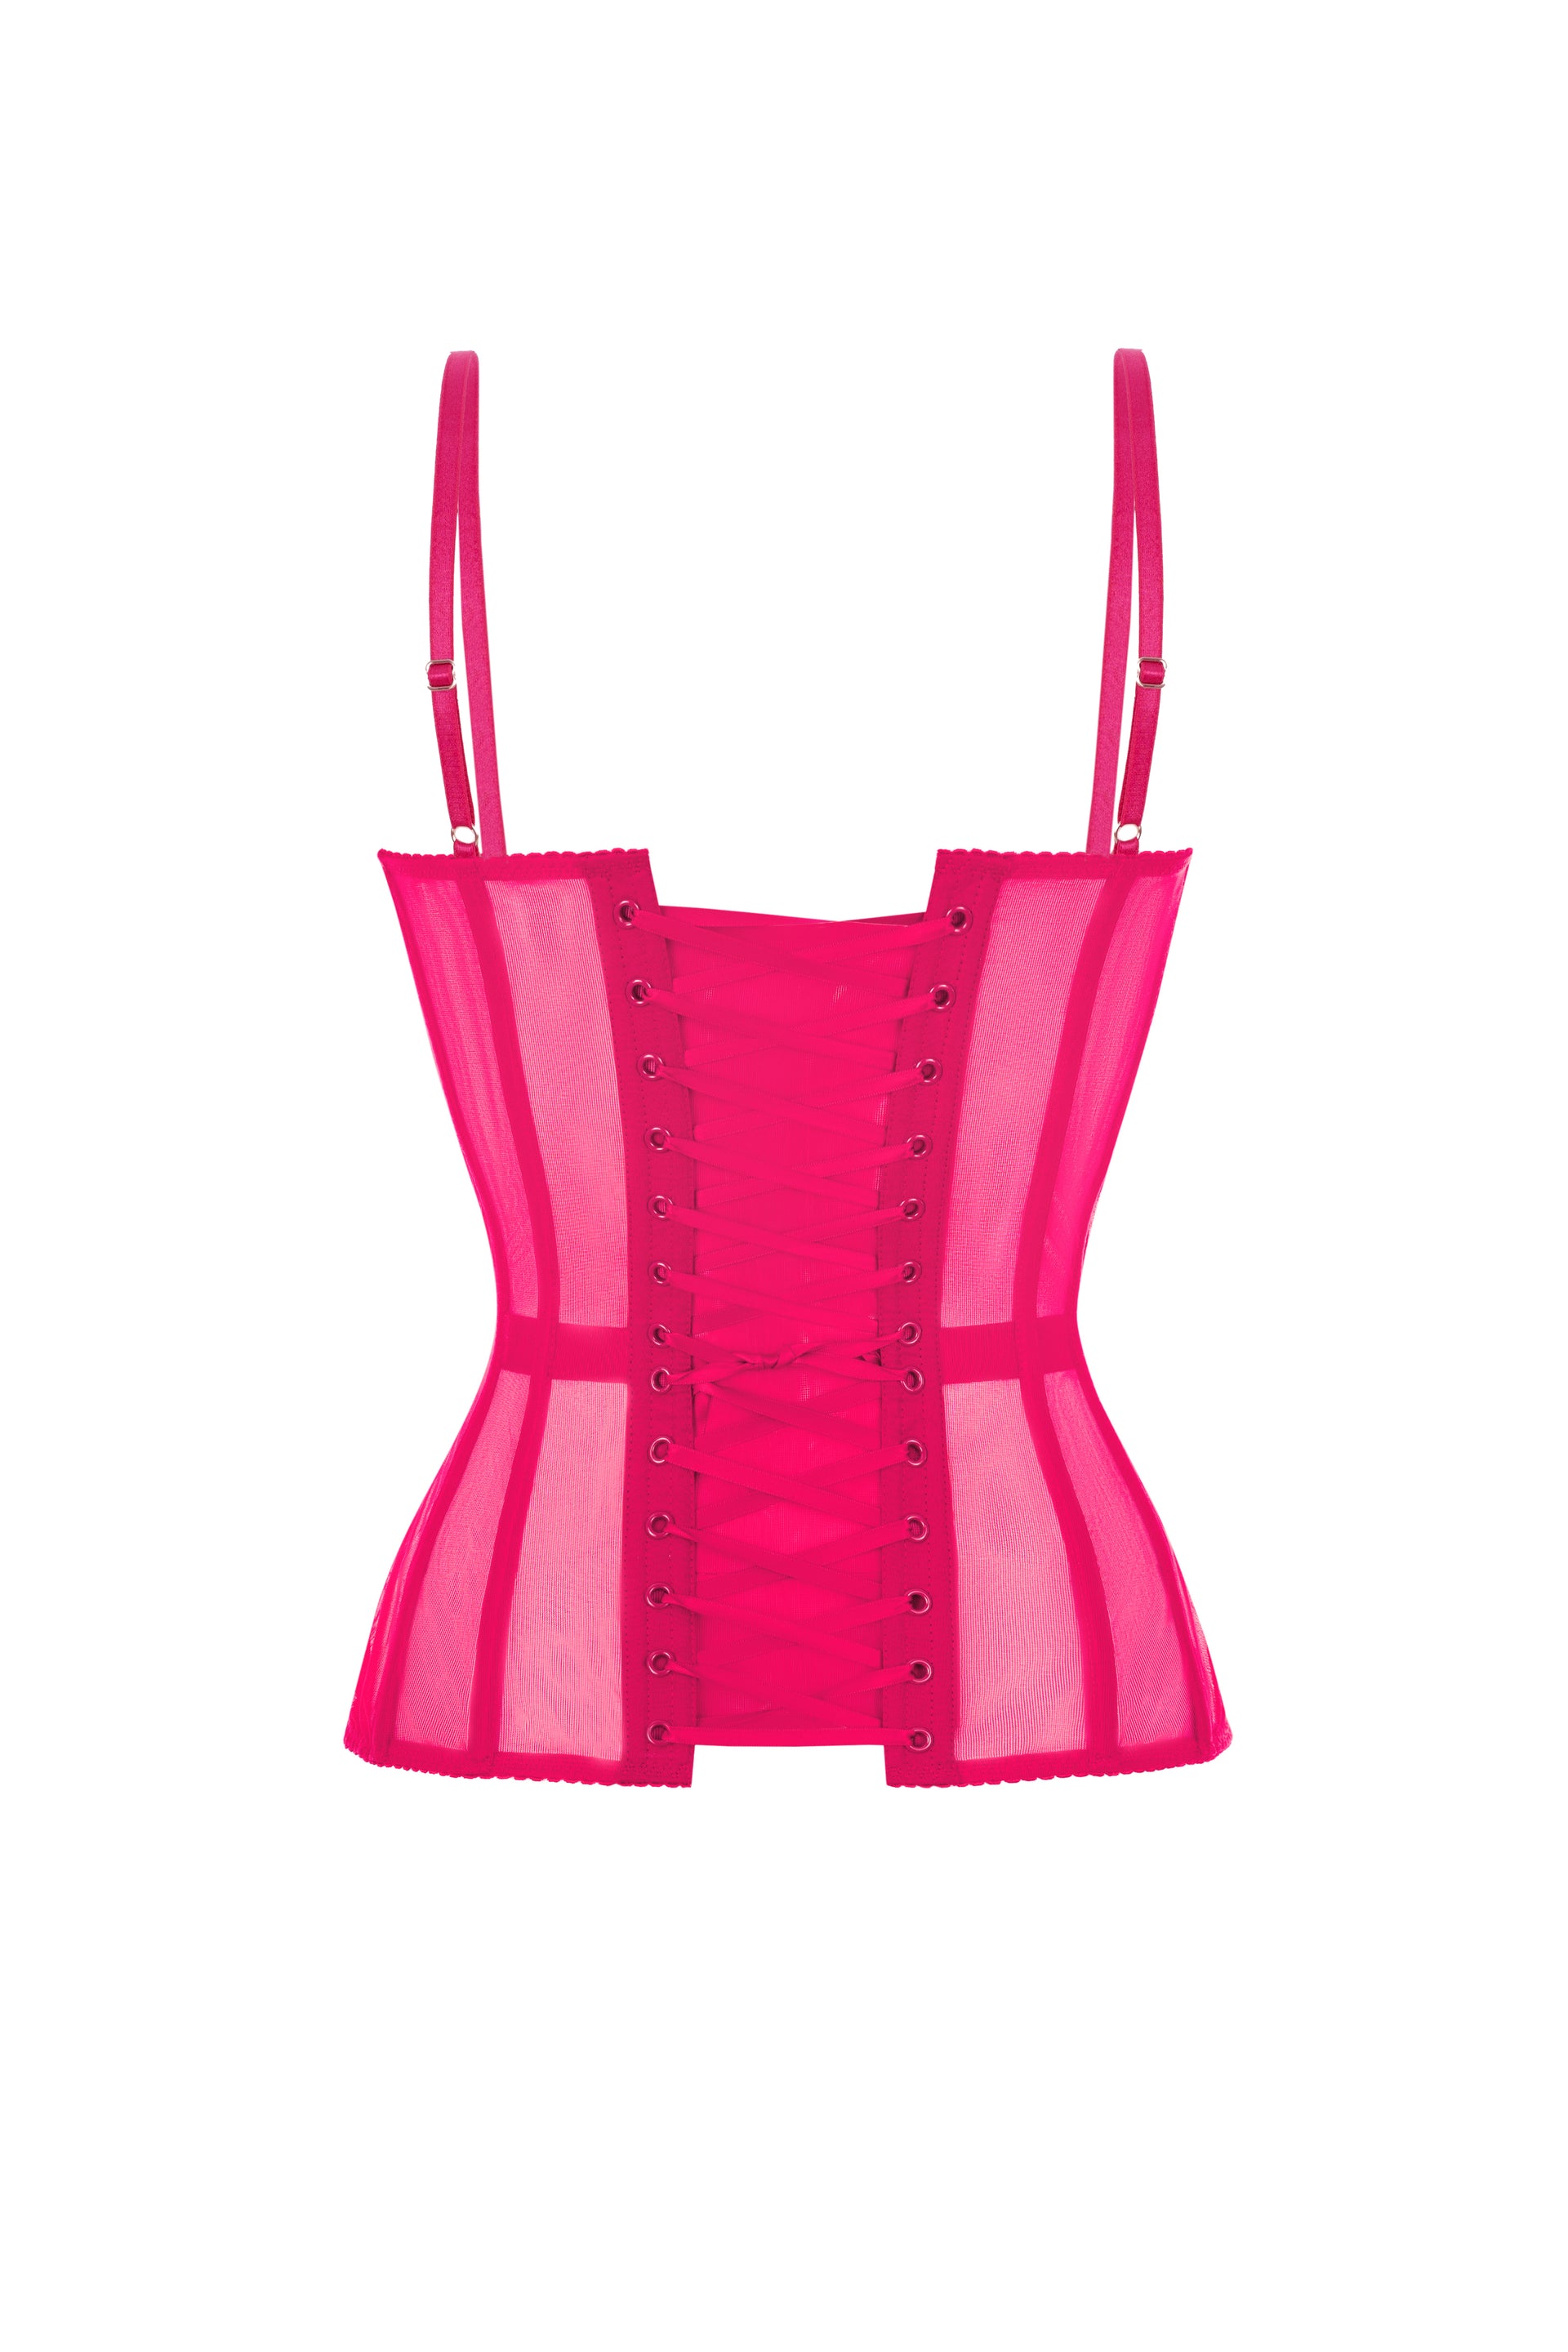 Hot pink corset with transparent cups